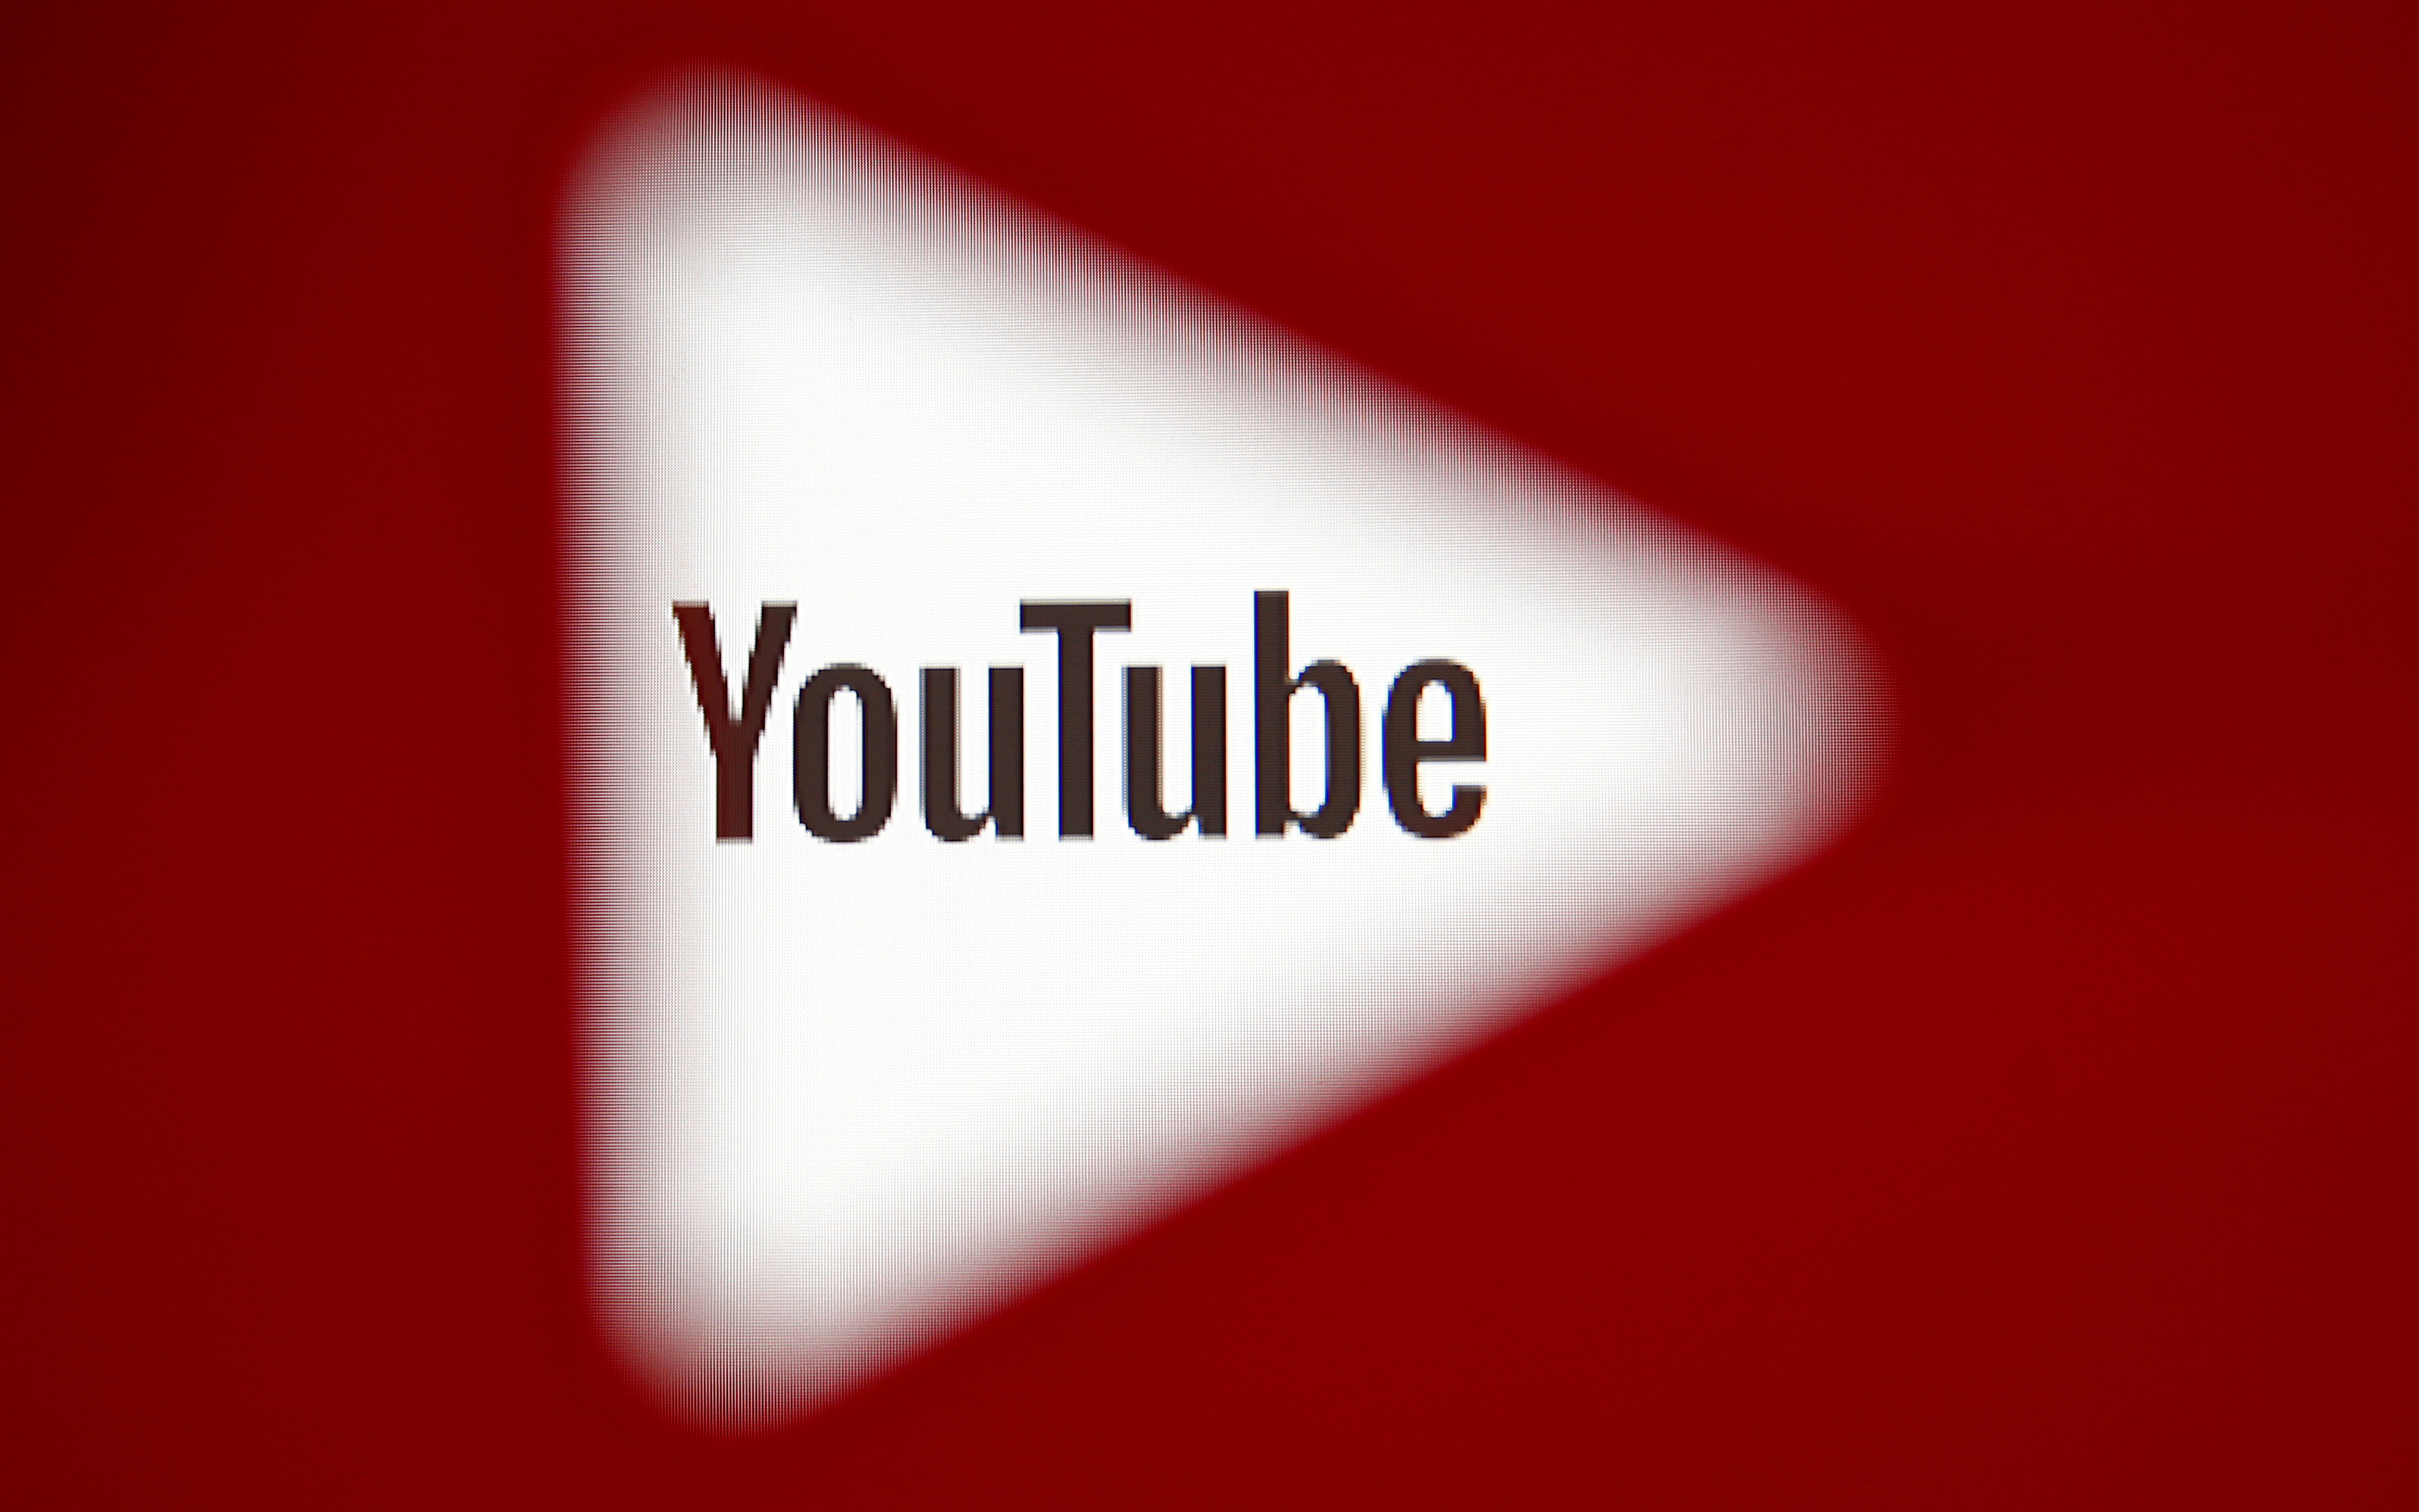 A 3D-printed YouTube icon is seen in front of a displayed YouTube logo in this illustration